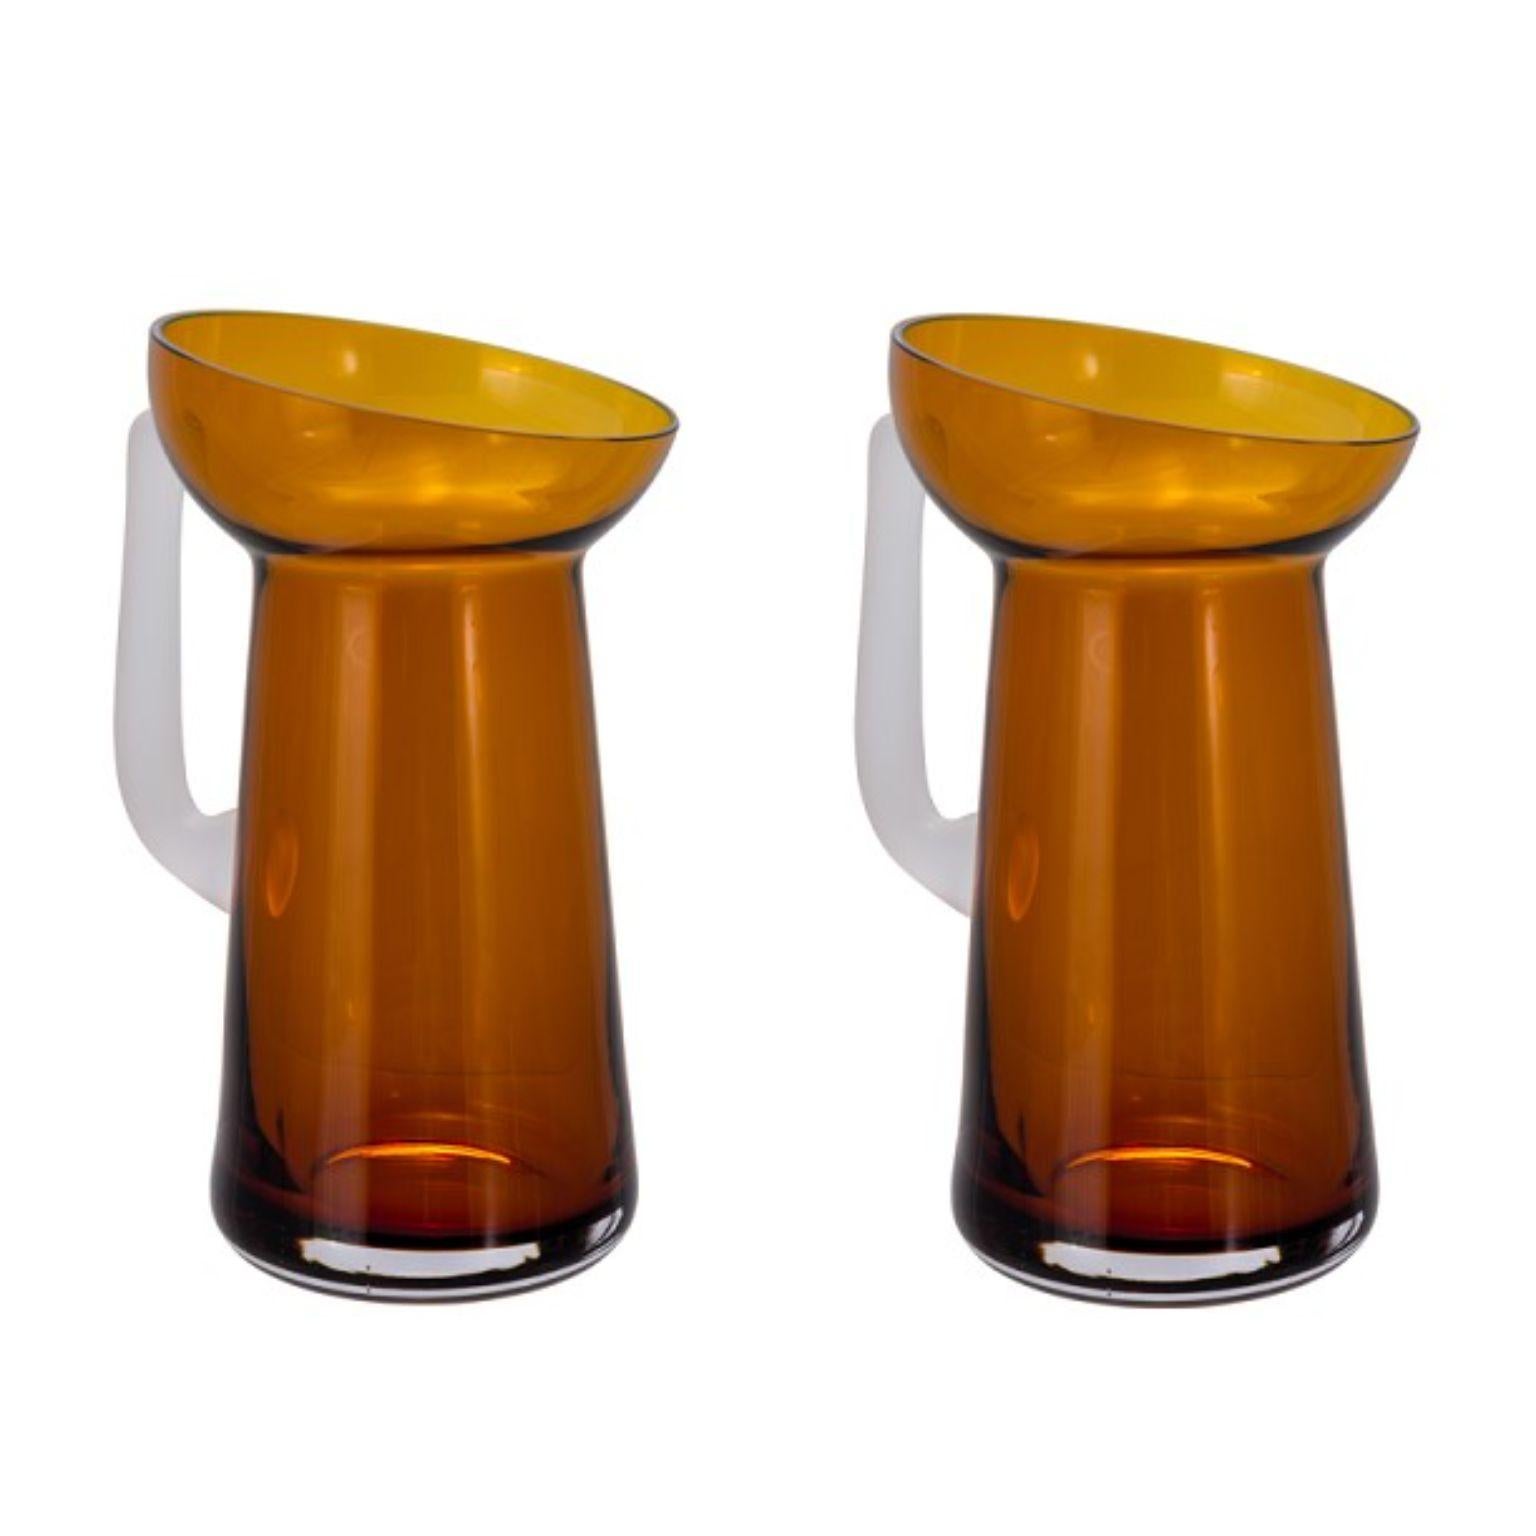 Set of 2 Carafes dark amber and transparent by Pulpo
Dimensions: D15 x H28.5 cm
Materials: handmade glass

Pick them, pour them, roll them, and hold them; a kaleidoscope of colour, form and texture awaits. The potpourri collections by German